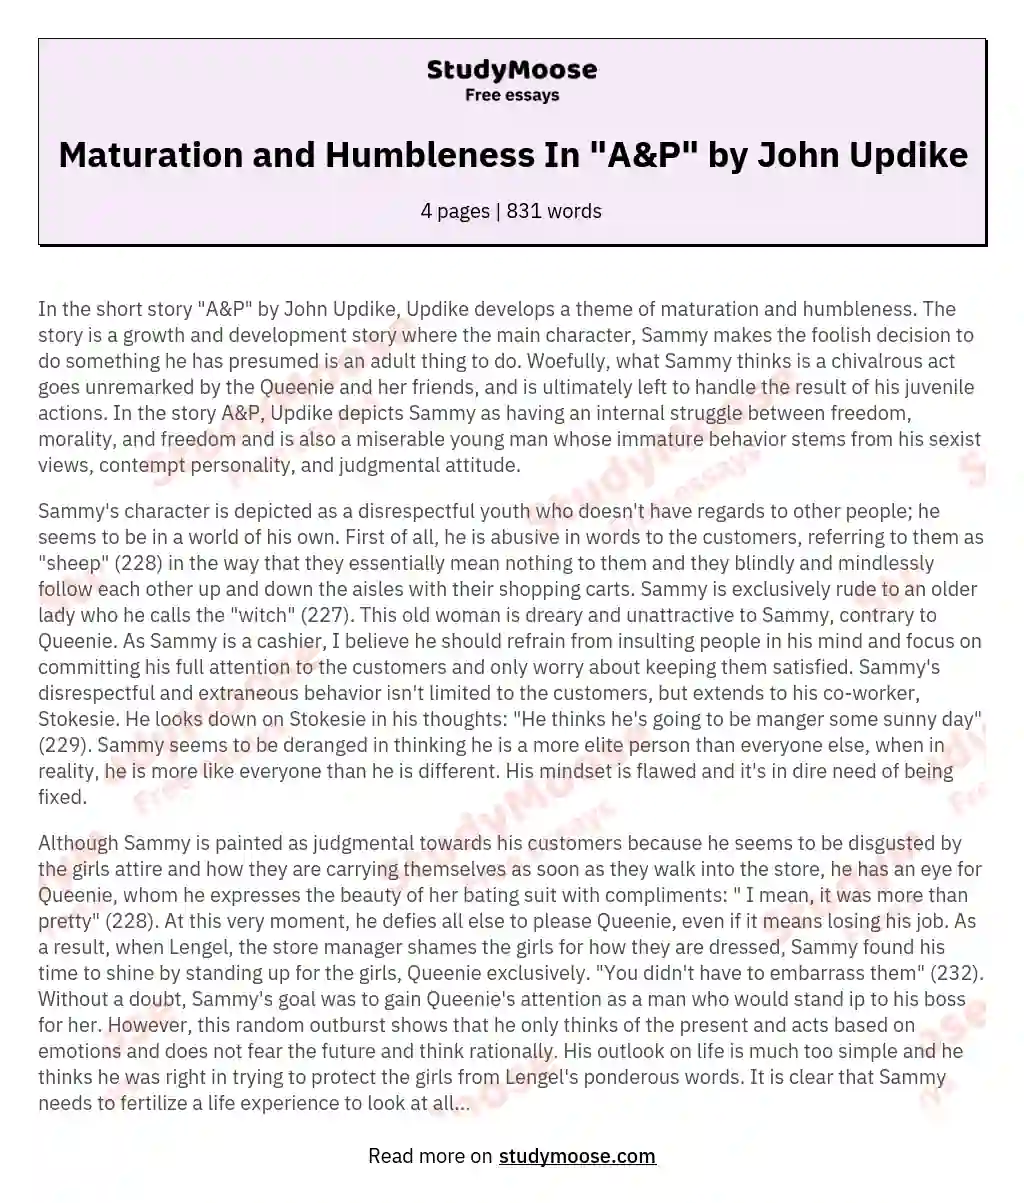 Maturation and Humbleness In "A&P" by John Updike